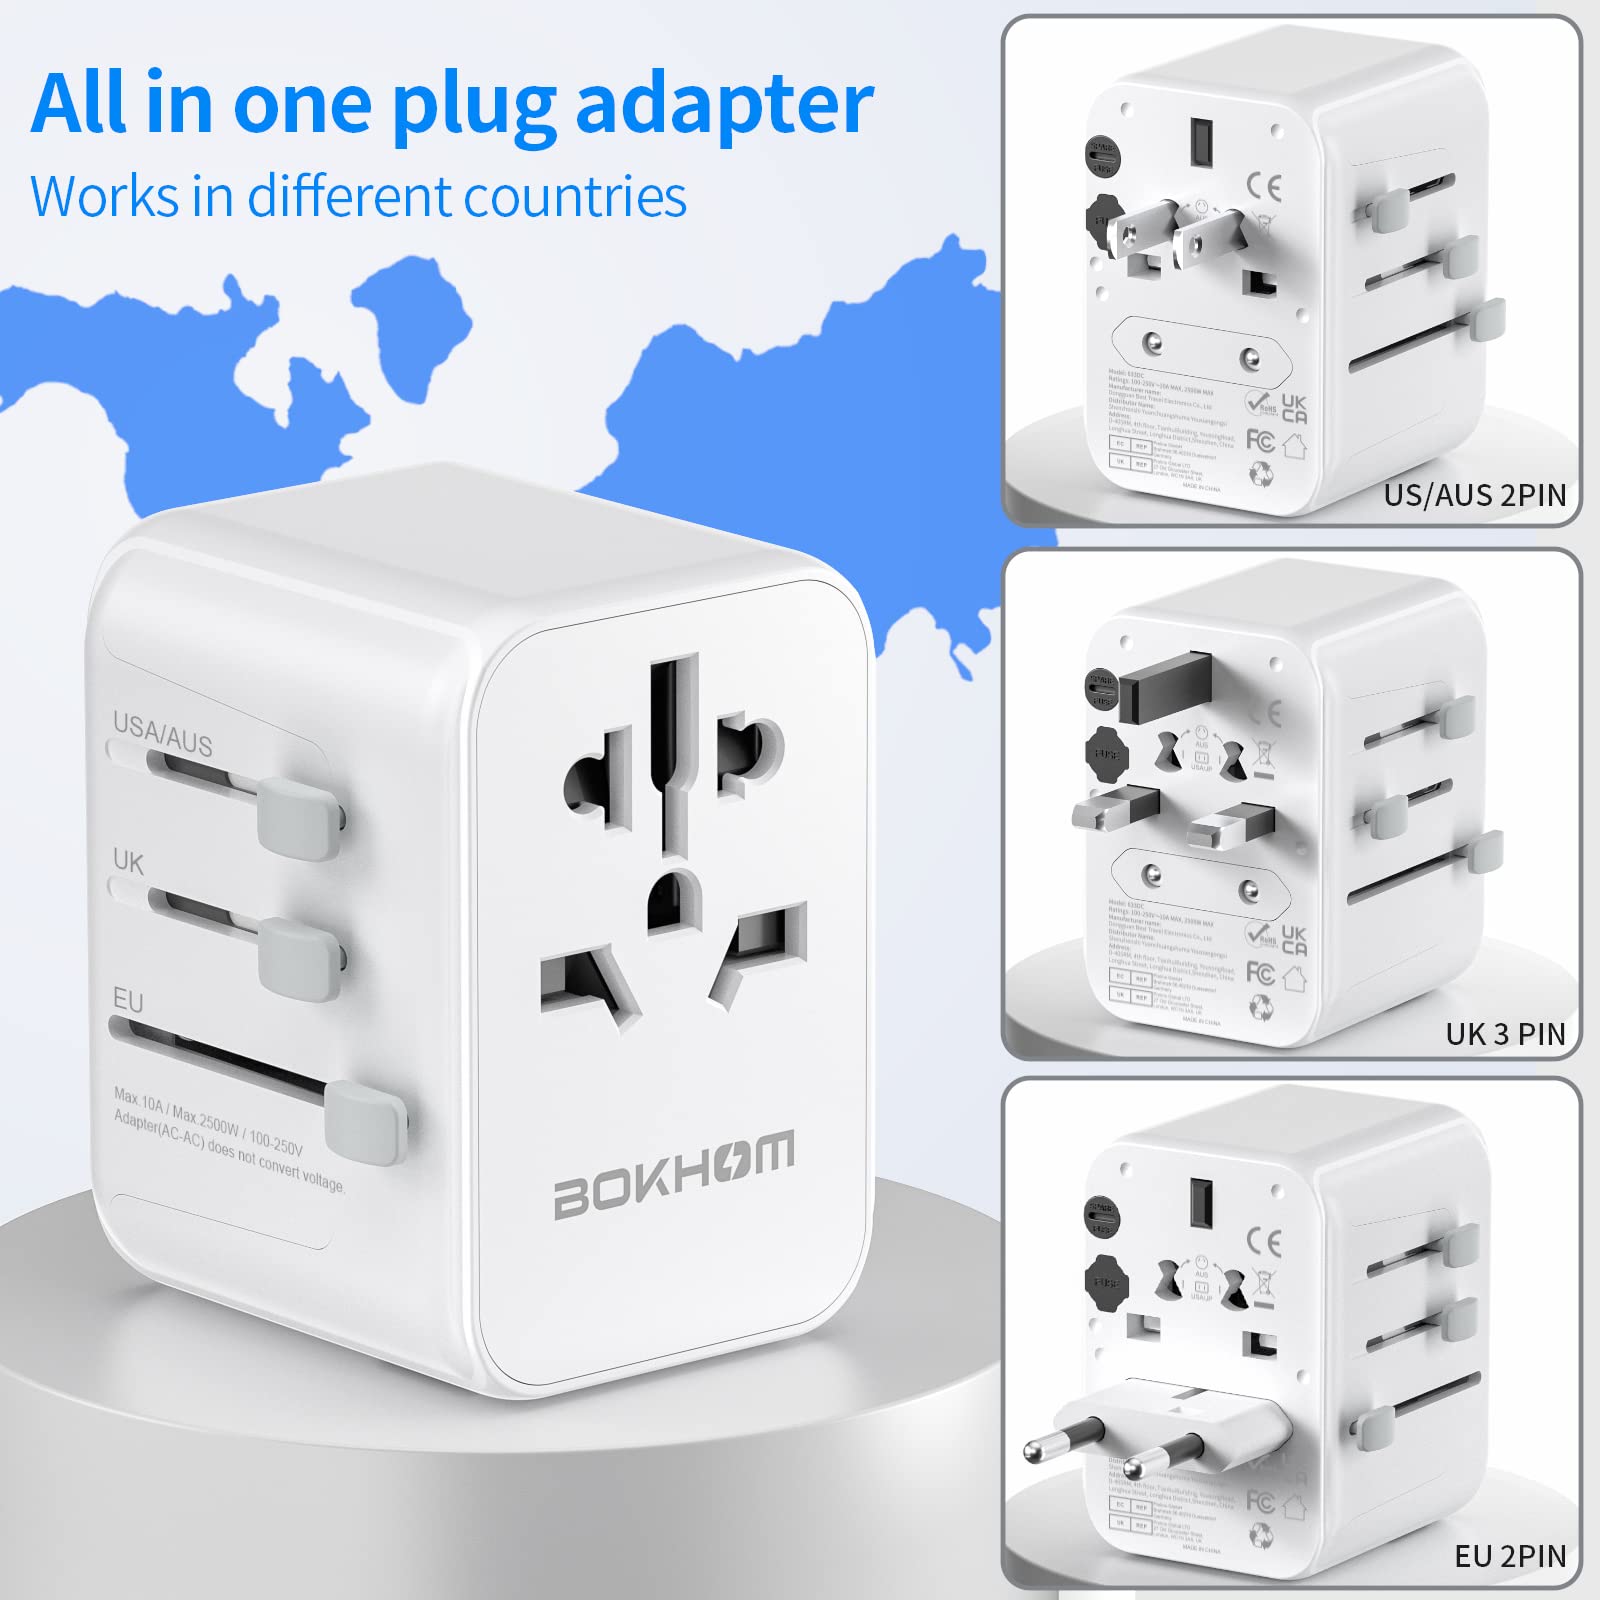 Worldwide Travel Adapter with USB C PD 30W Fast Charging , Travel Plug Adapter (3 USB C 2 USB-A ) Universal Socket Dual 10A Fuses Surge Protection All In One International Adapter - EU UK US AU Plugs